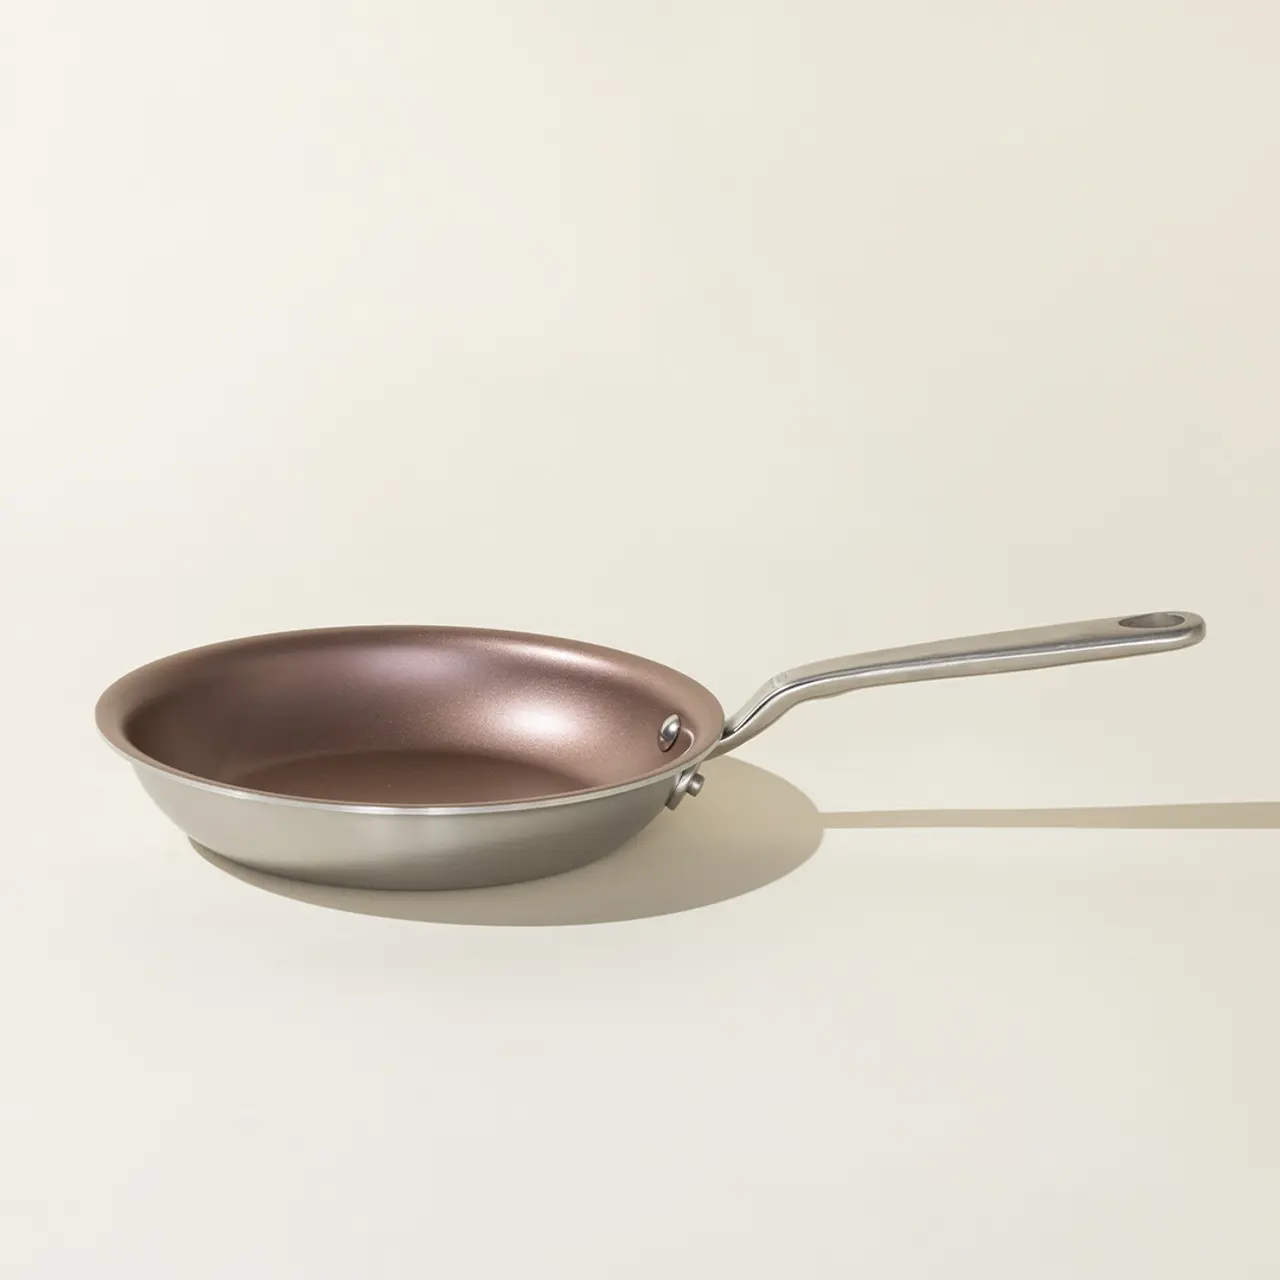 A solitary non-stick frying pan with a stainless steel handle is positioned on a neutral background, casting a soft shadow.